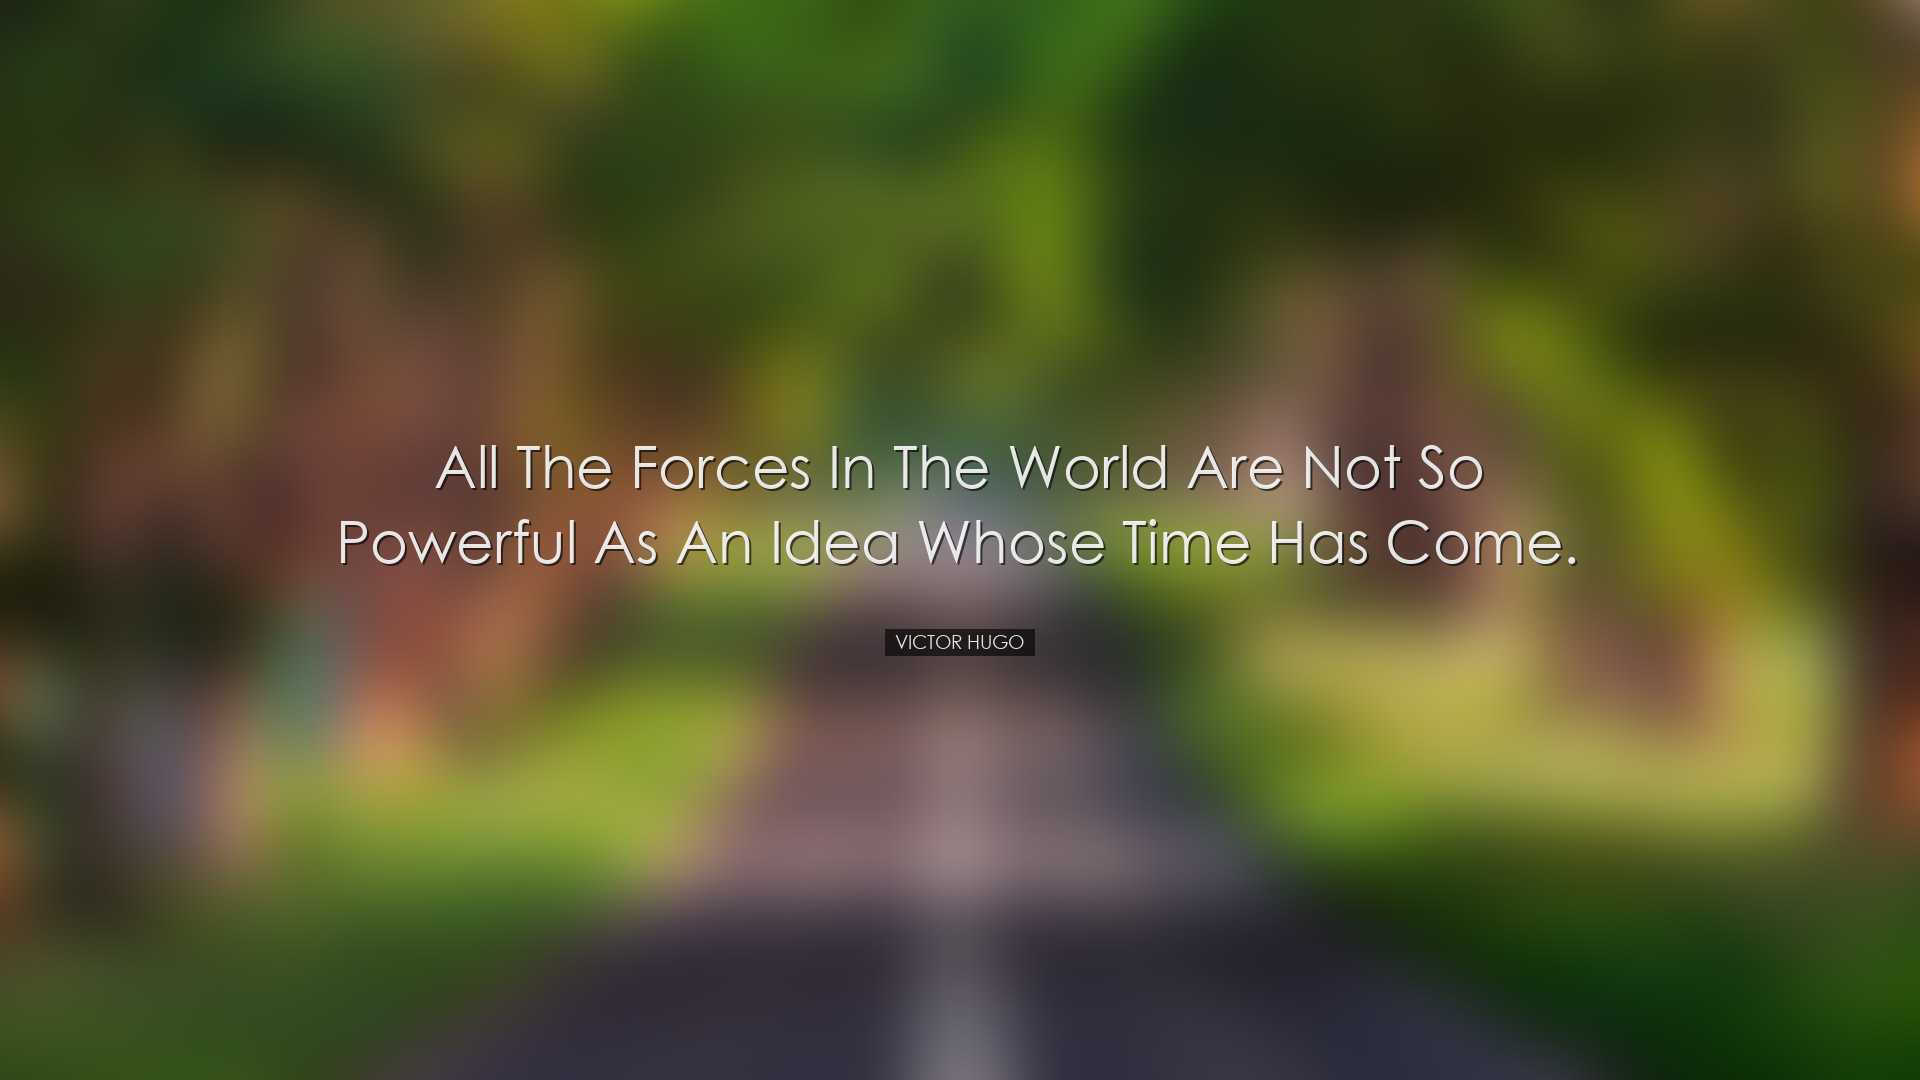 All the forces in the world are not so powerful as an idea whose t